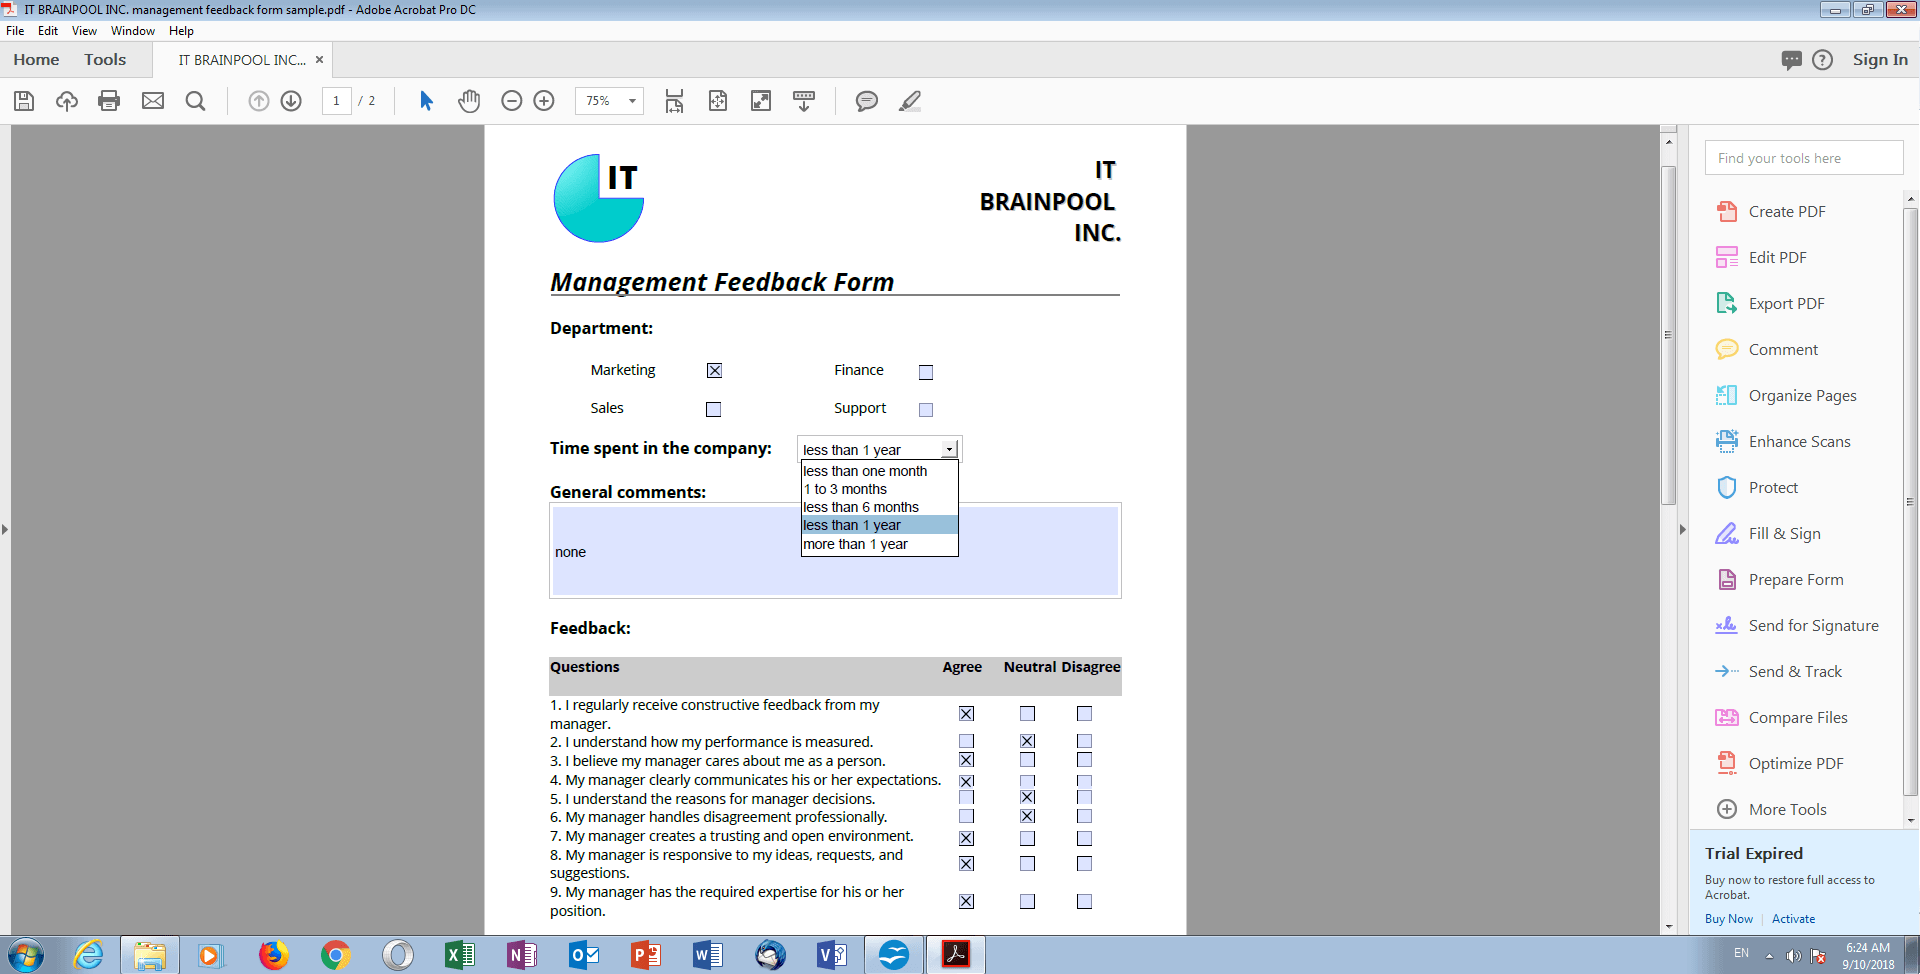 Example of a management feedback form in a PDF Reader